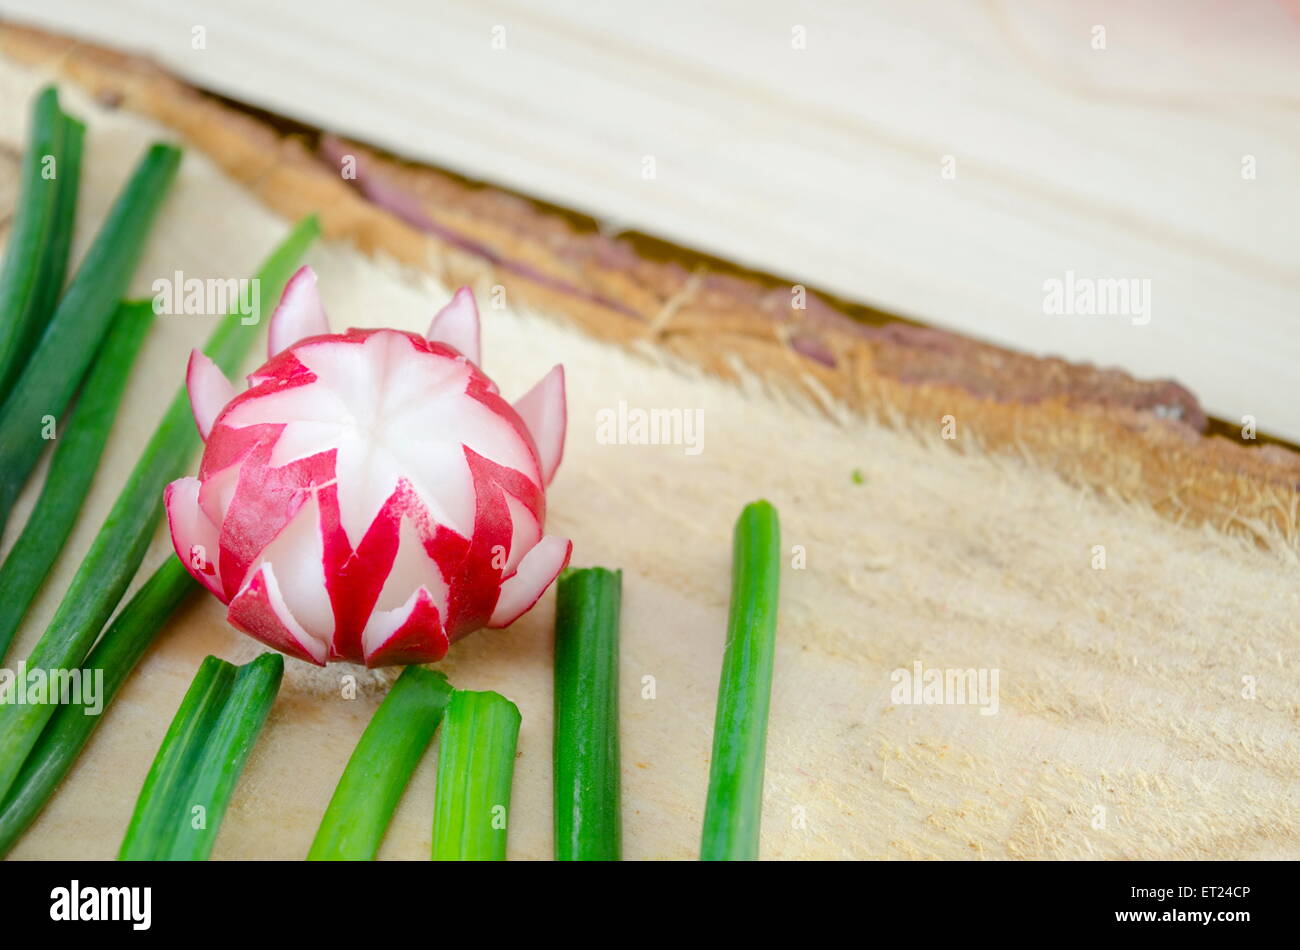 Decorated red radish on a rough wooden surface Stock Photo